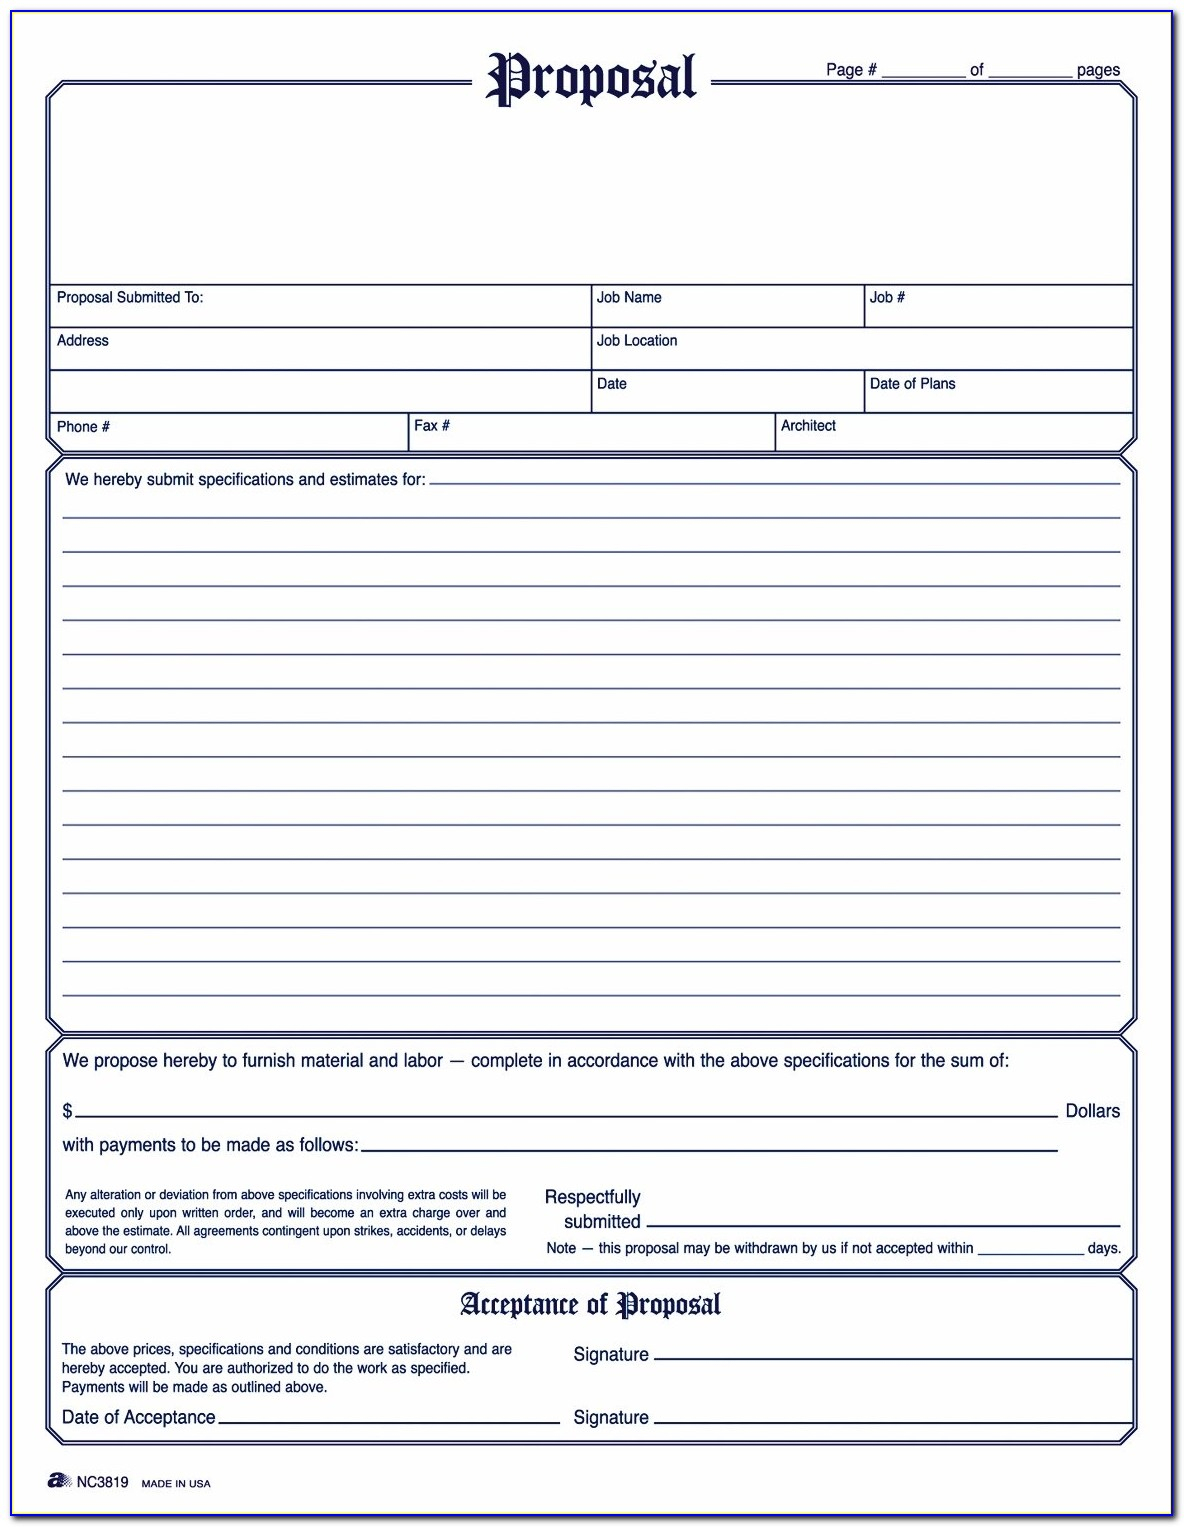 Free Printable Proposal Forms - Form : Resume Examples #yrlw05Appd - Free Printable Proposal Forms